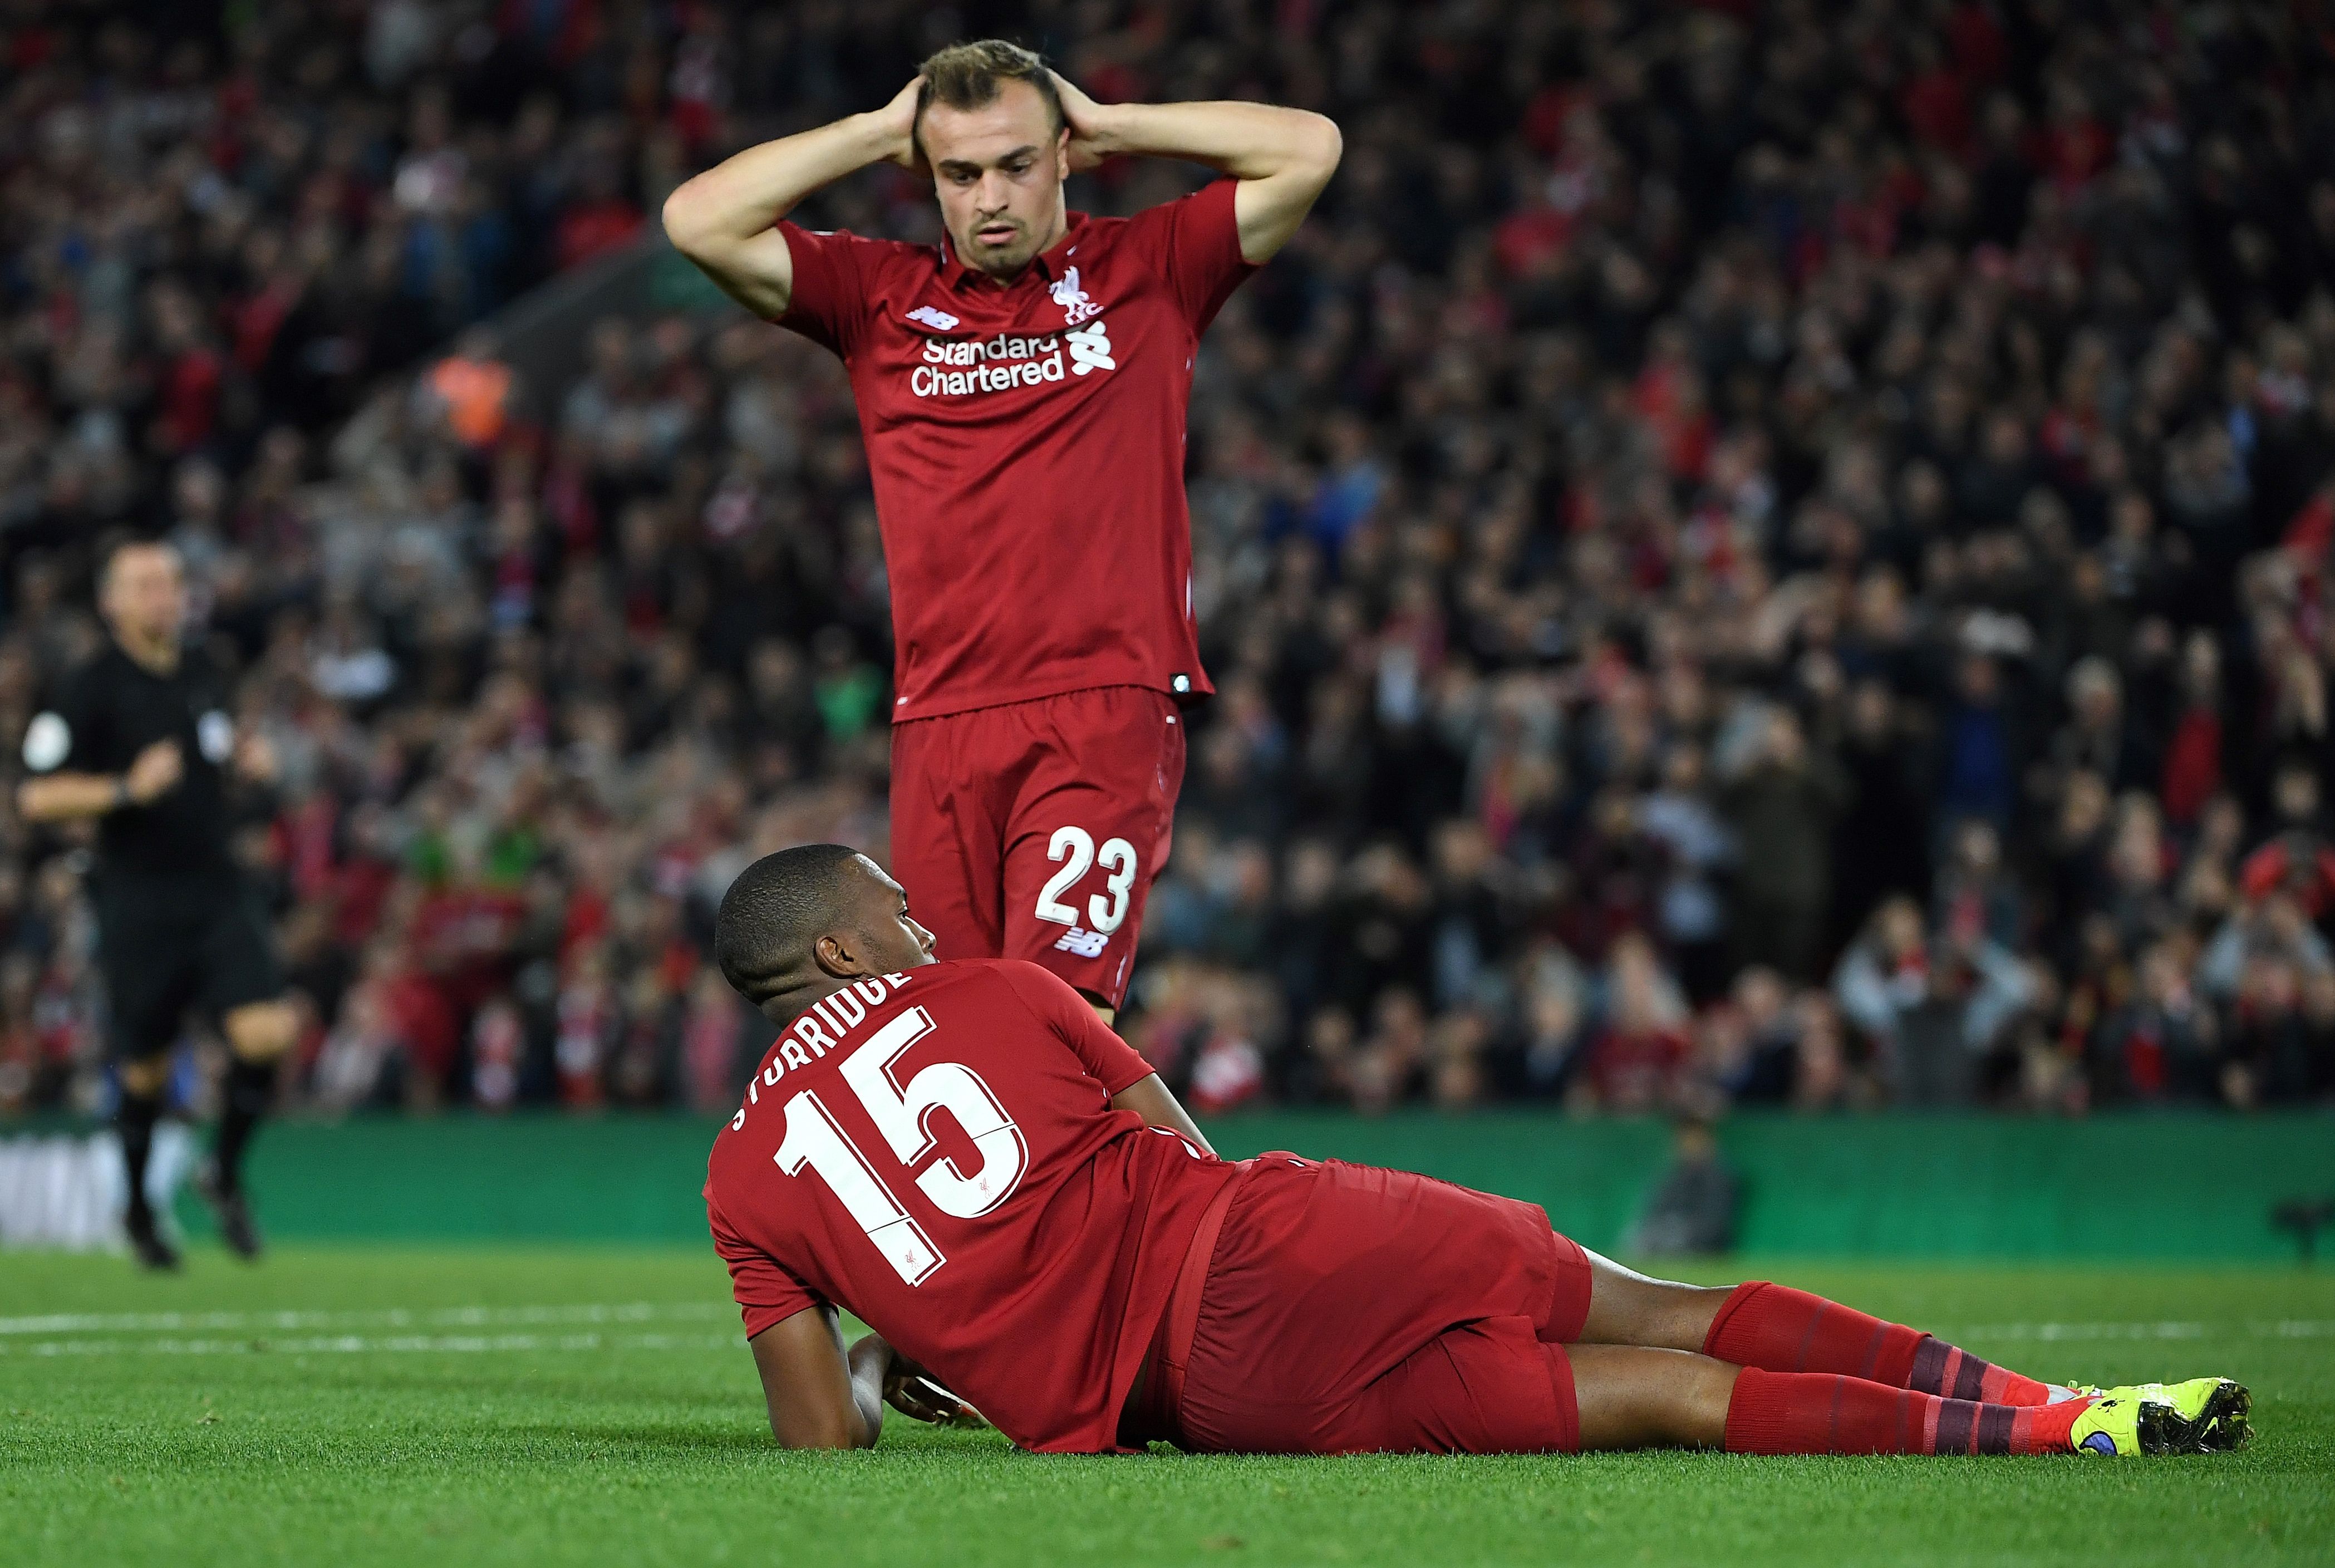 Liverpool's Swiss midfielder Xherdan Shaqiri (C) reacts after Liverpool's English striker Daniel Sturridge missed an open goal during the English League Cup third round football match between Liverpool and Chelsea at Anfield in Liverpool, north west England on September 26, 2018. (Photo by Paul ELLIS / AFP) / RESTRICTED TO EDITORIAL USE. No use with unauthorized audio, video, data, fixture lists, club/league logos or 'live' services. Online in-match use limited to 120 images. An additional 40 images may be used in extra time. No video emulation. Social media in-match use limited to 120 images. An additional 40 images may be used in extra time. No use in betting publications, games or single club/league/player publications. /         (Photo credit should read PAUL ELLIS/AFP/Getty Images)